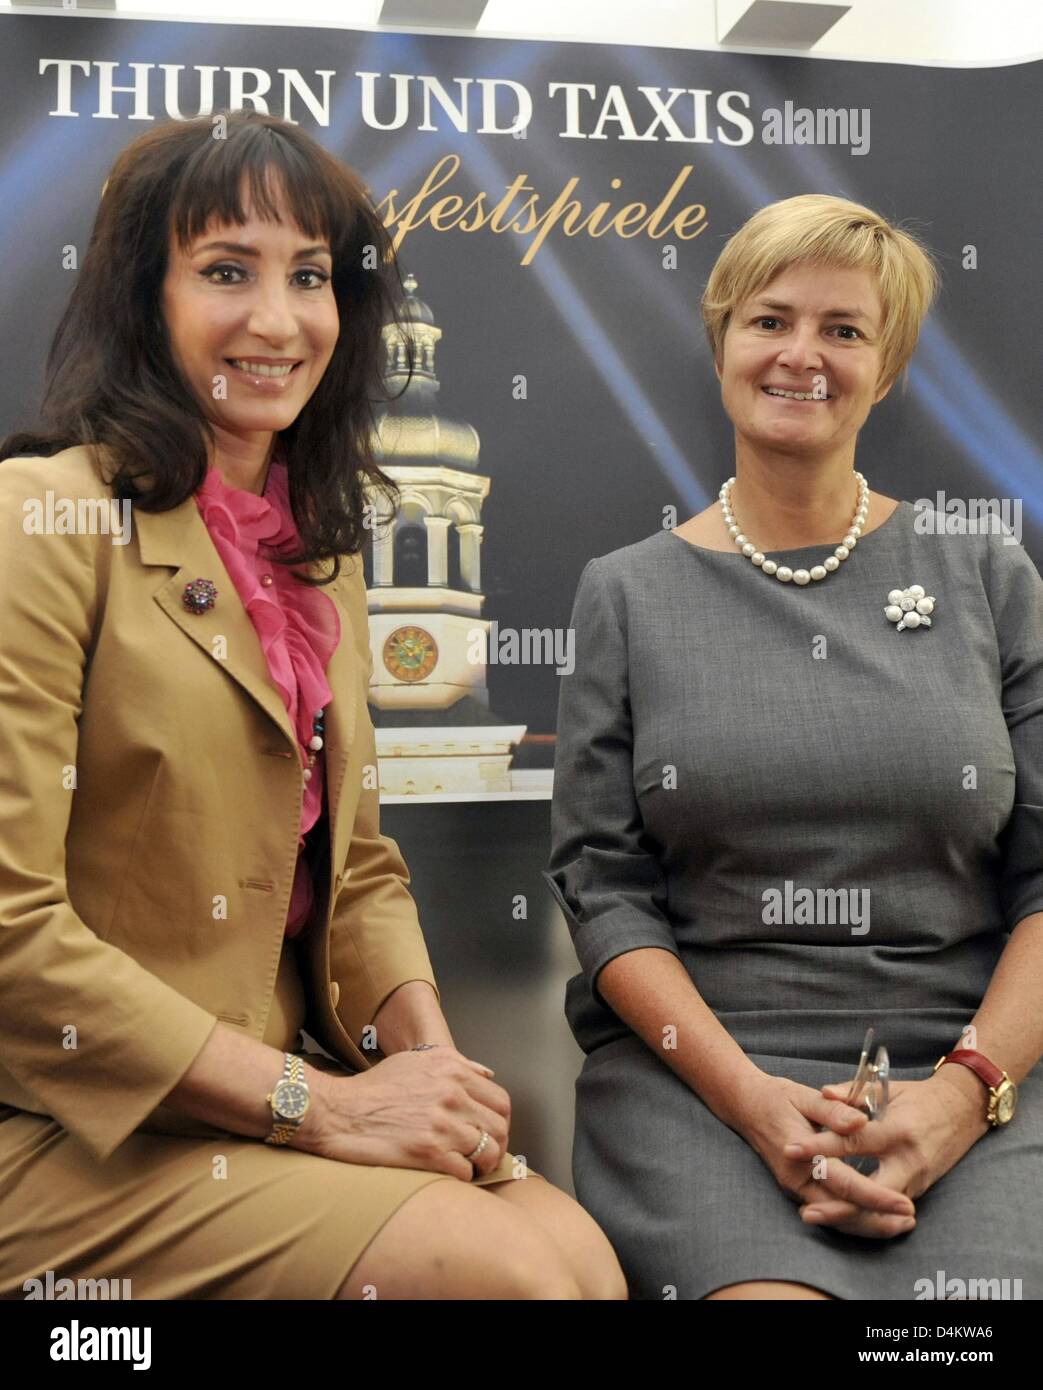 Gloria Princess of Thurn and Taxis (R) and musical and opera singer Anna-Maria Kaufmann pose at a press conference for the Thurn and Taxis Castle Festival 2009 in Munich, Germany, 22 May 2009. The festival will take place from 17 til 26 July 2009 in Regensburg, Germany. Photo: ANDREAS GEBERT Stock Photo